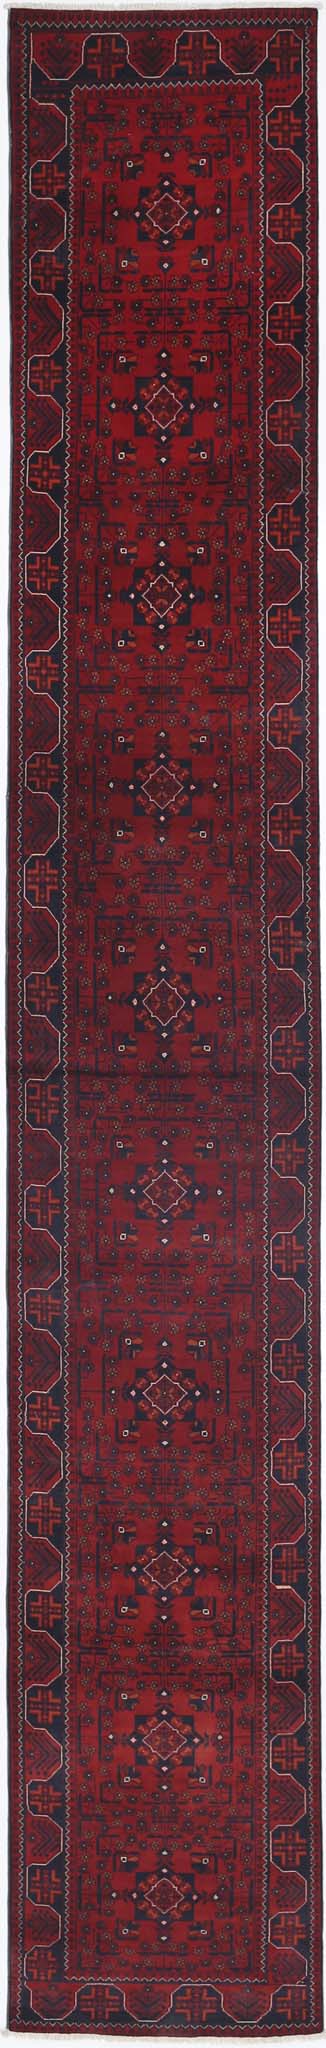 Tribal Hand Knotted Afghan Khamyab Wool Rug of Size 2'6'' X 18'7'' in Red and Red Colors - Made in Afghanistan